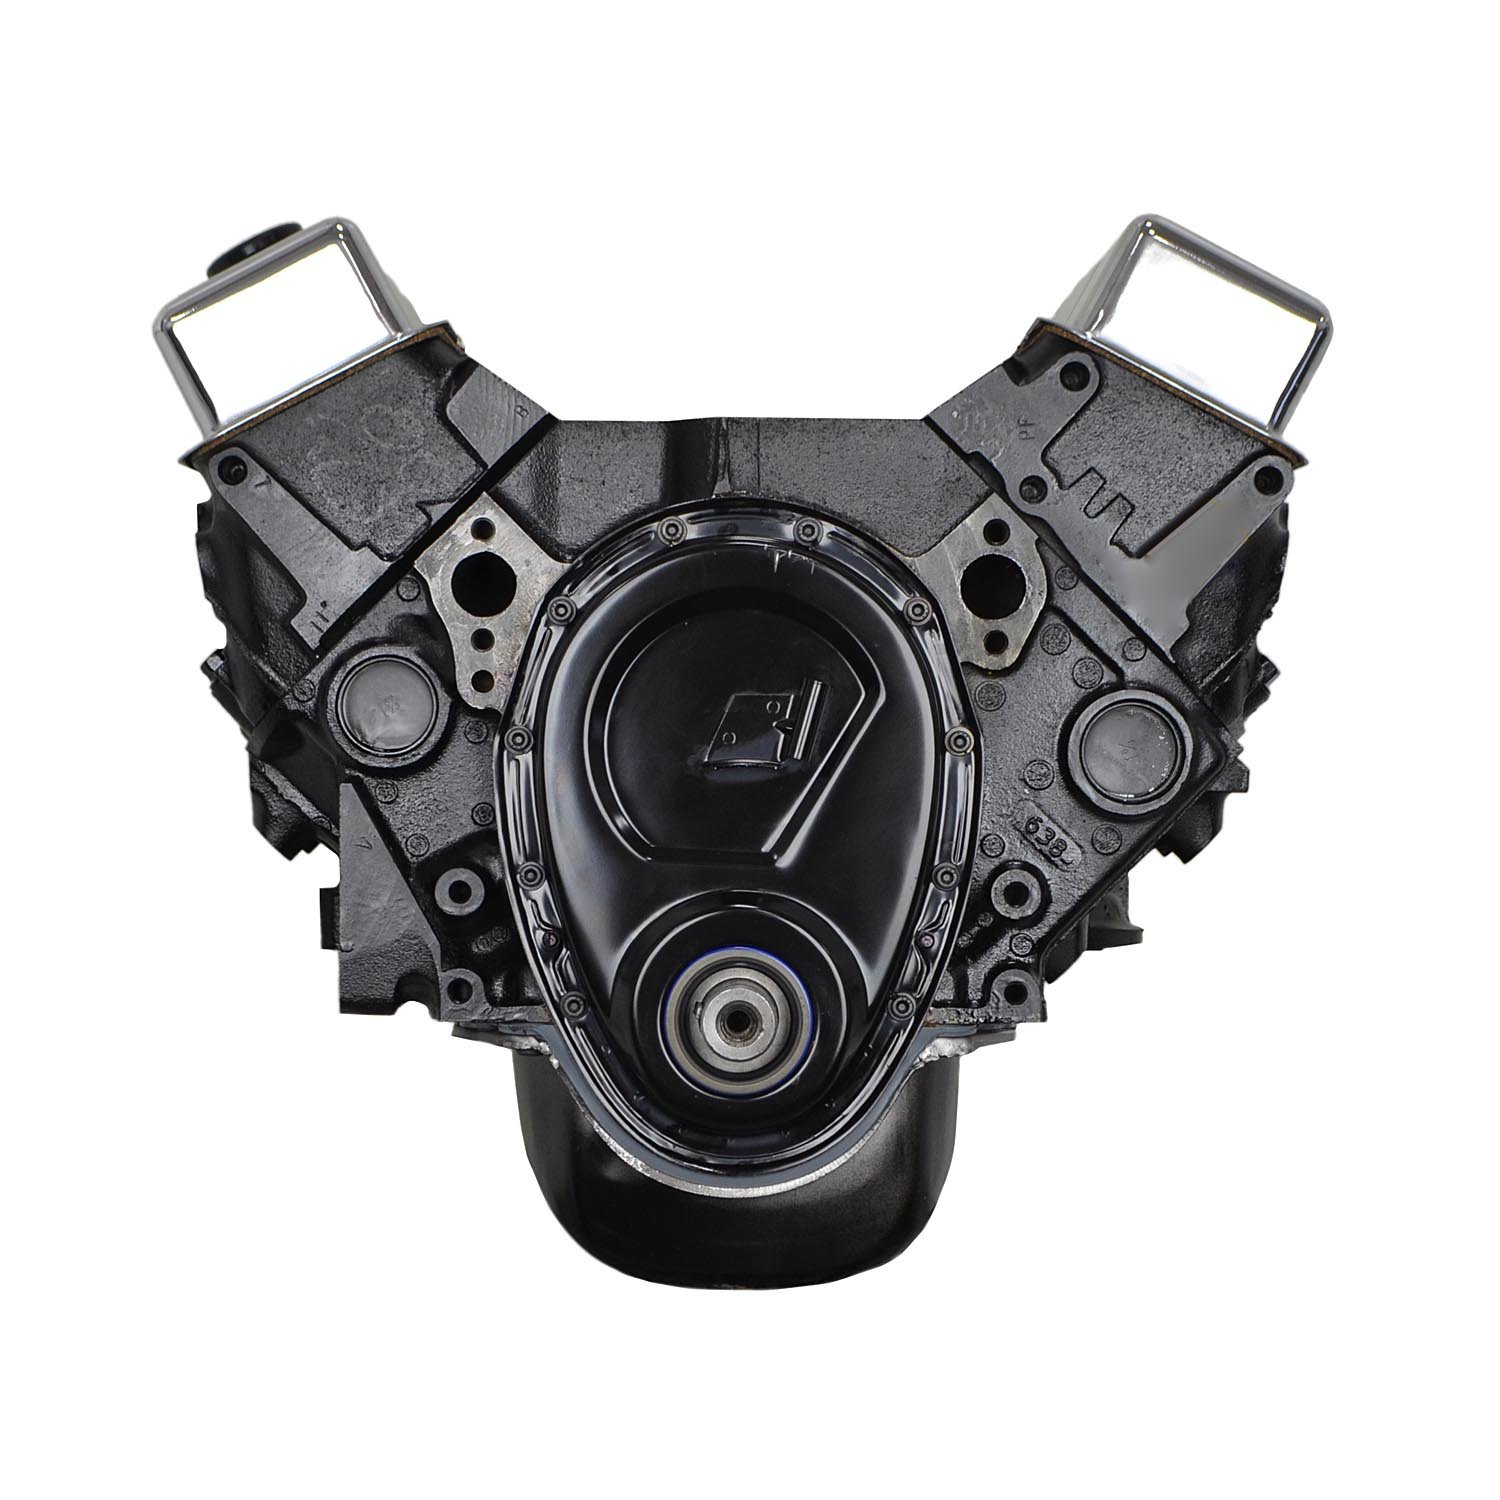 Remanufactured Crate Engine for 1986 Chevy & GMC